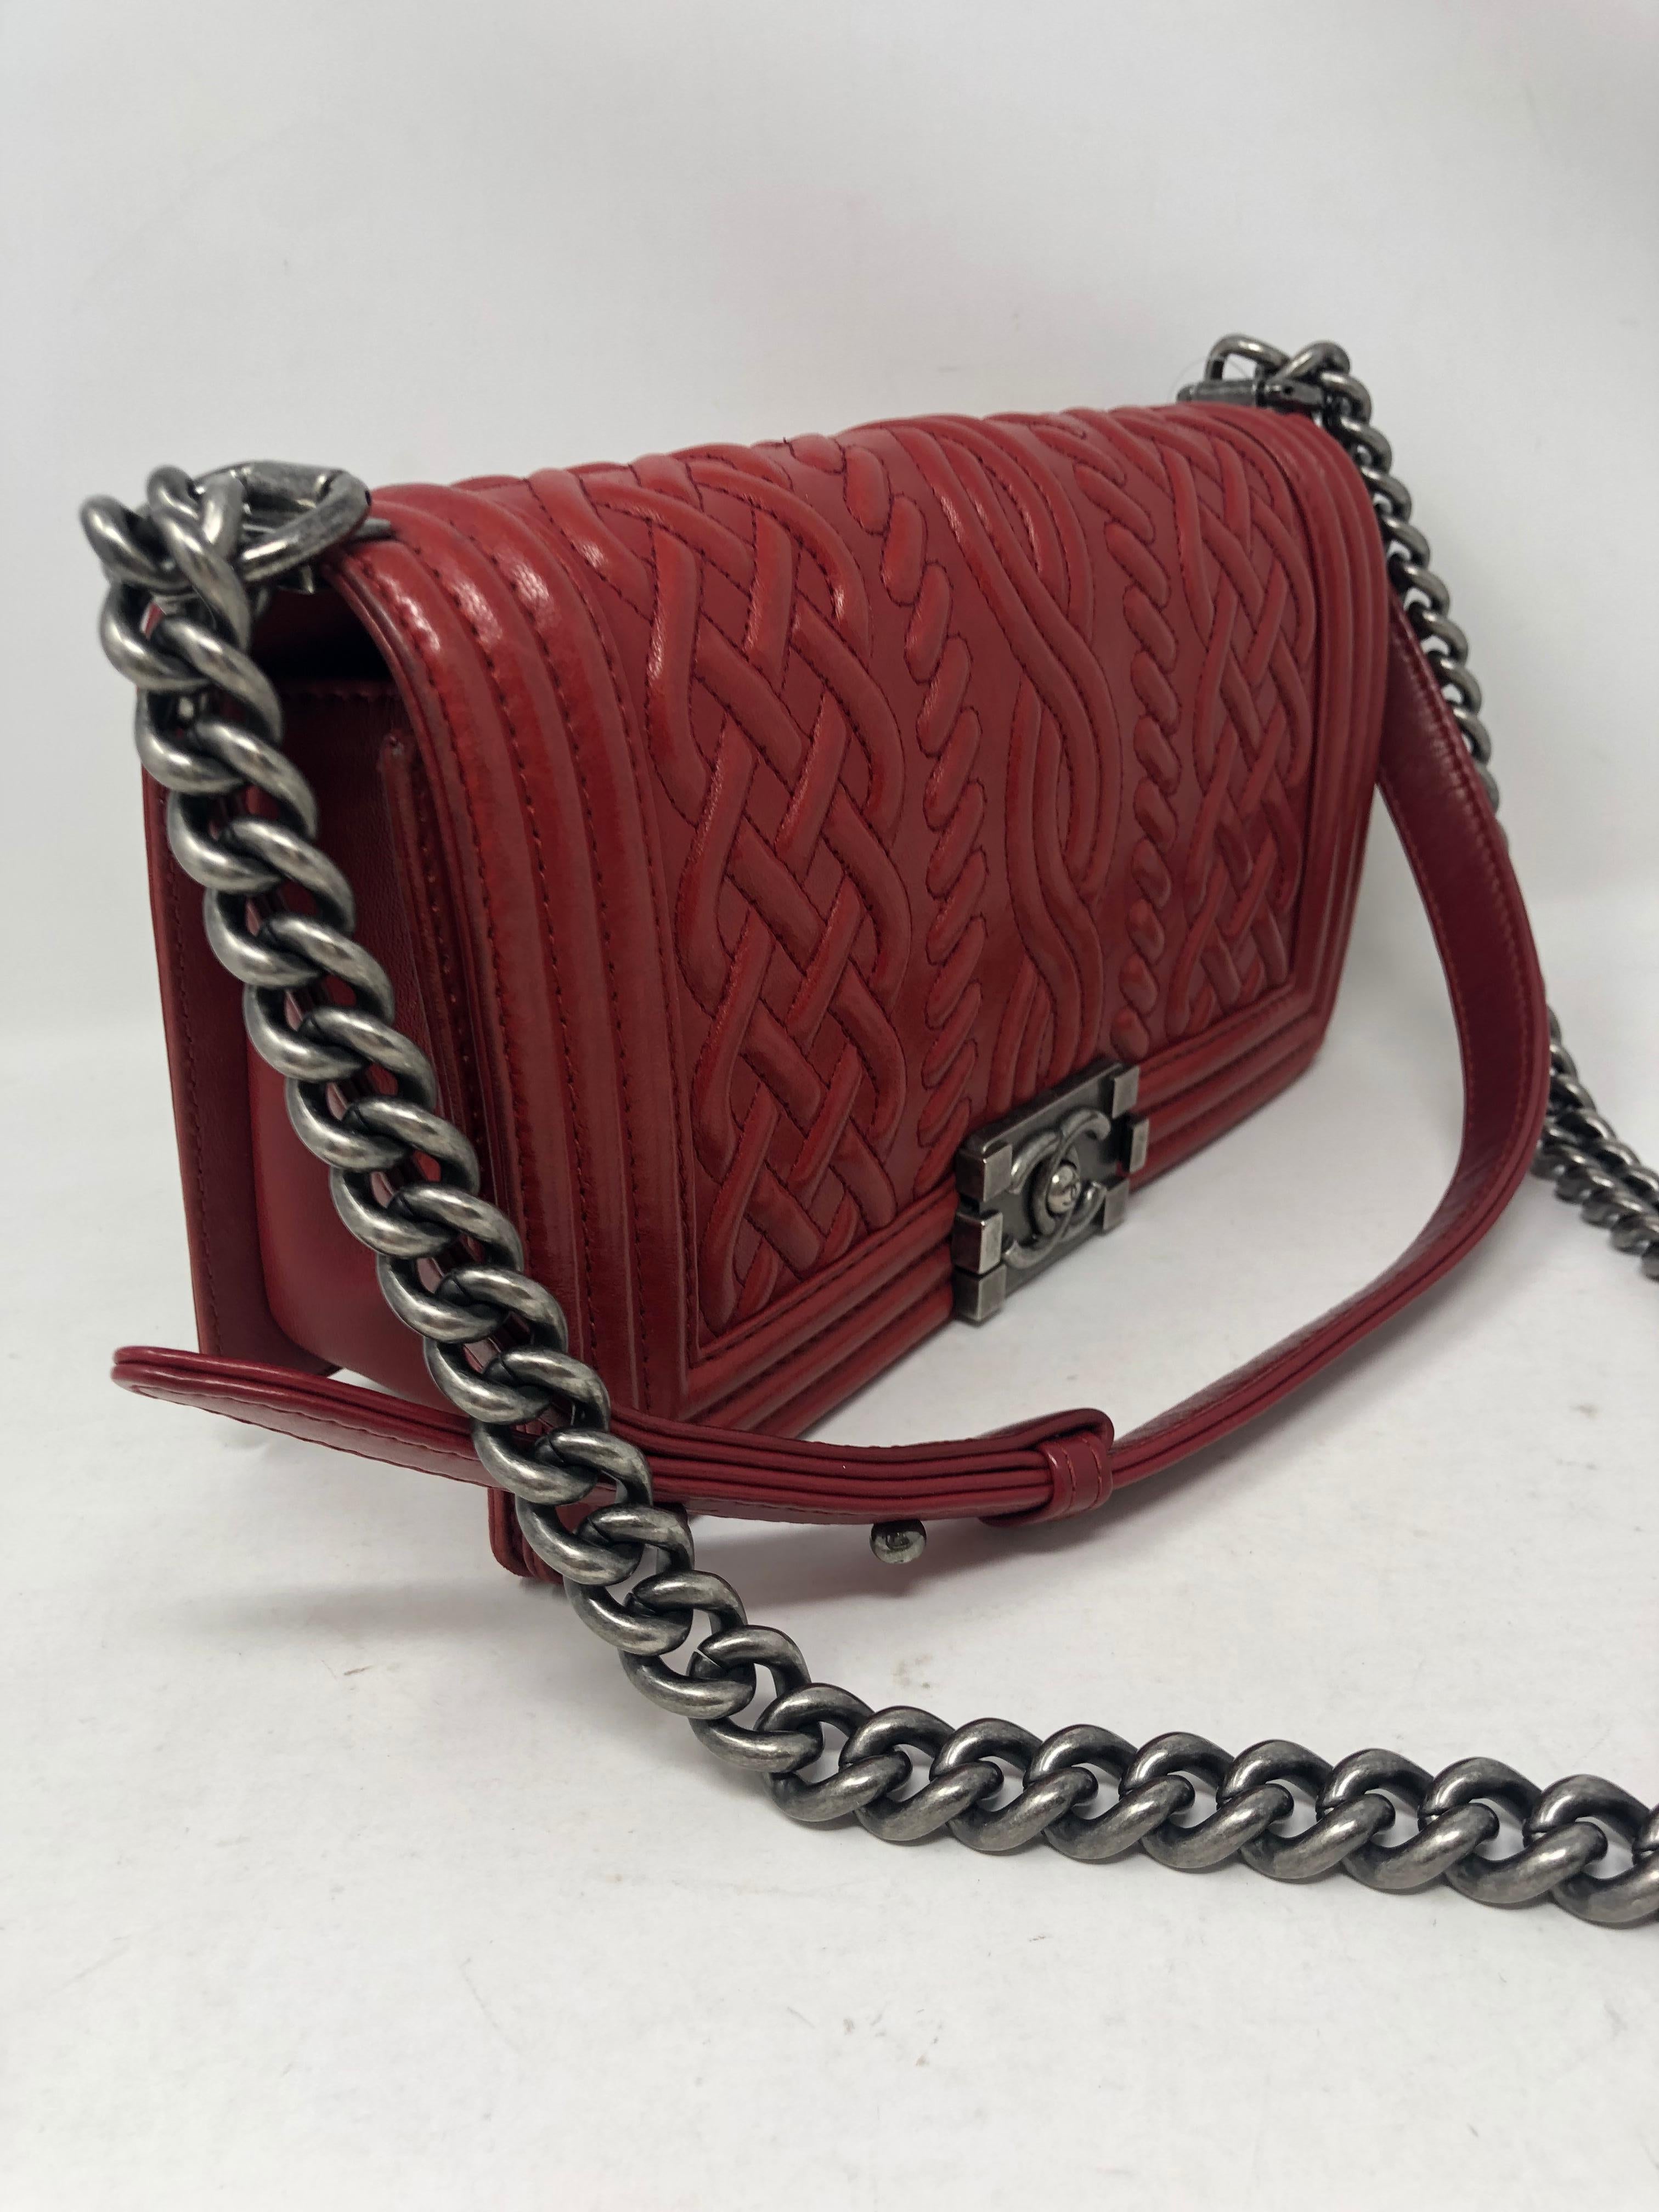 Chanel Red Celtic Boy Bag with ruthenium hardware. From the limited Paris-Edinburgh 2013 Collection. Medium size Boy Bag. Good condition light wear throughout and clean interior. Beautiful red leather that will turn heads. Guaranteed authentic. 